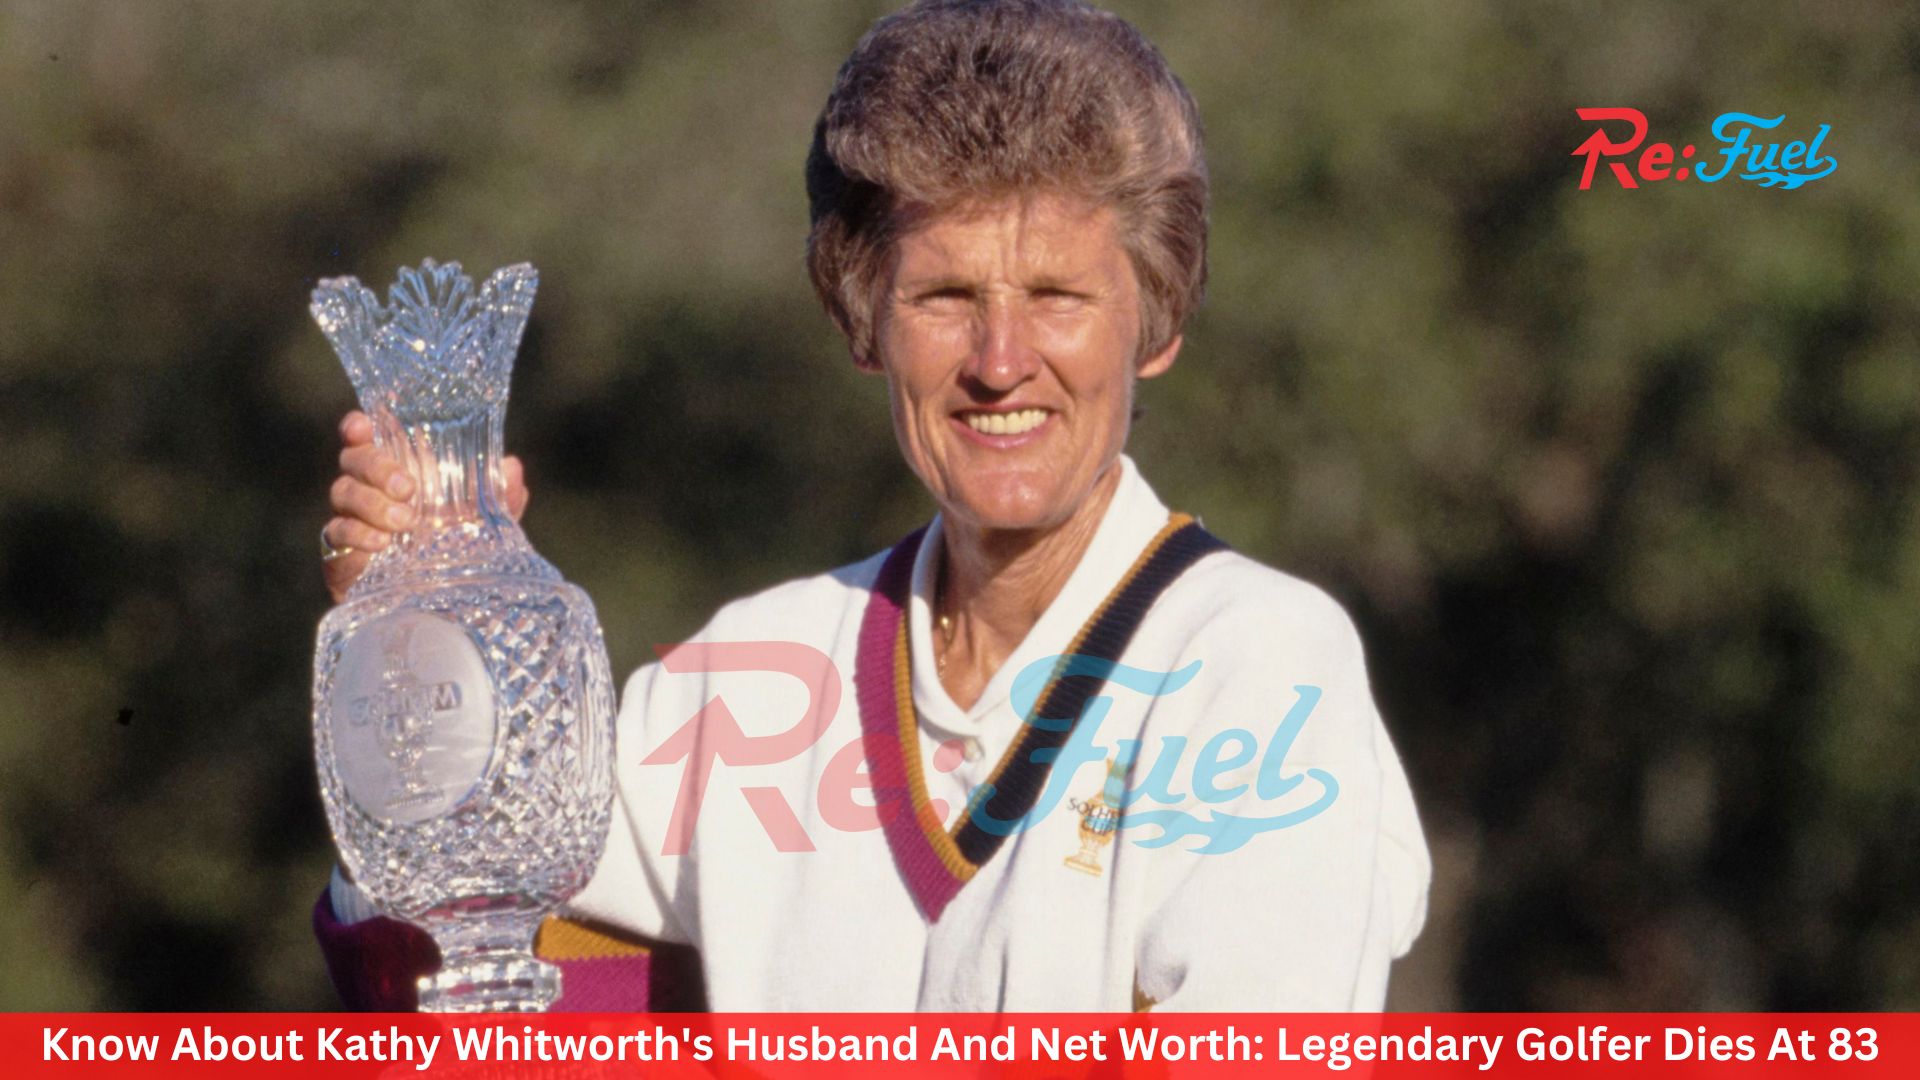 Know About Kathy Whitworth's Husband And Net Worth: Legendary Golfer Dies At 83